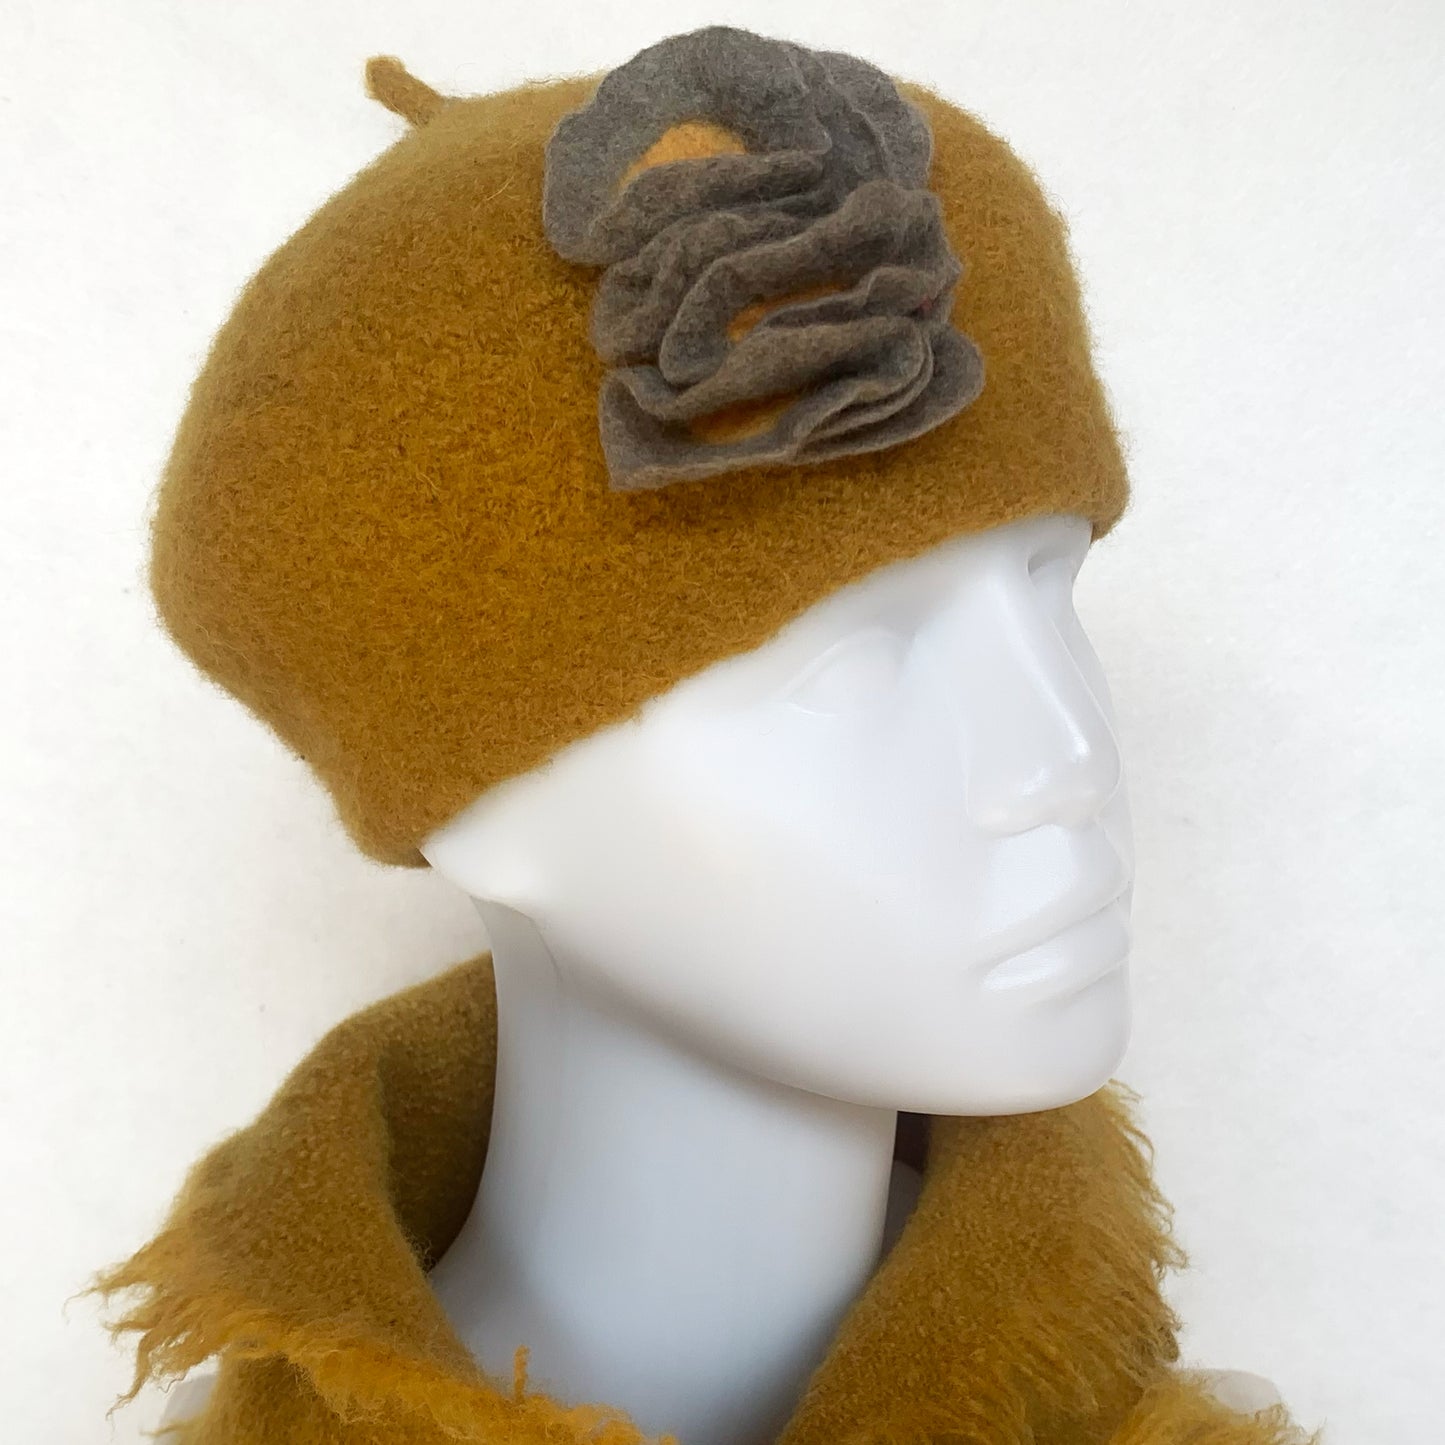 100% Felted Wool Beret - Gold & Grey flowers